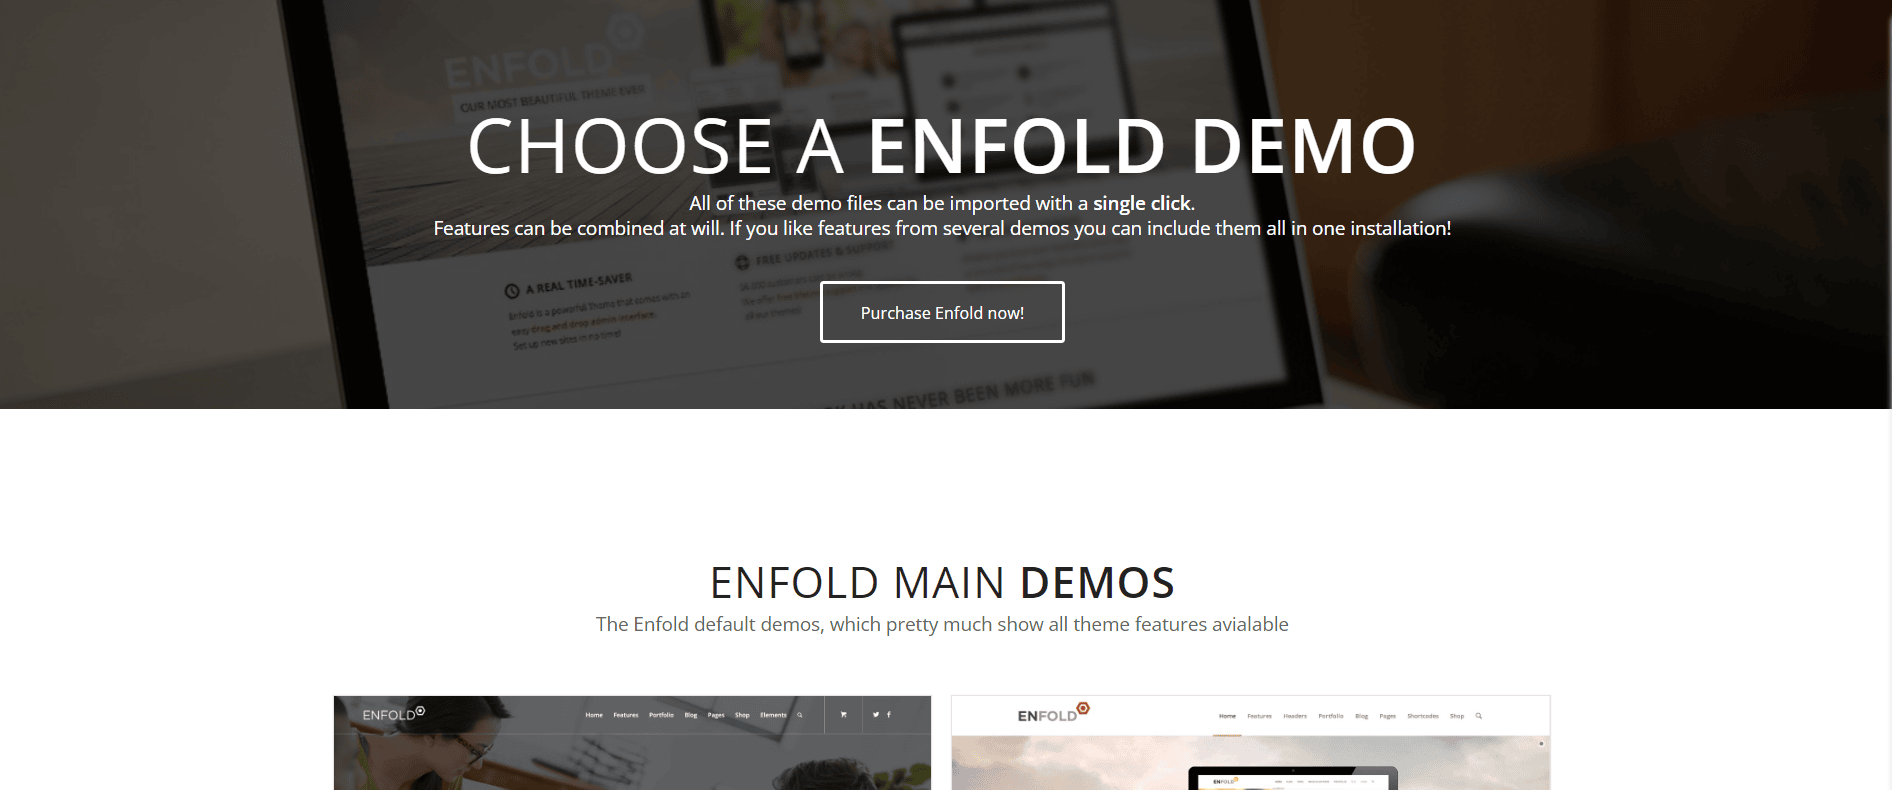 Enfold Theme's 'Choose a Demo' section highlighting the ability to combine features from various demos into one website installation.